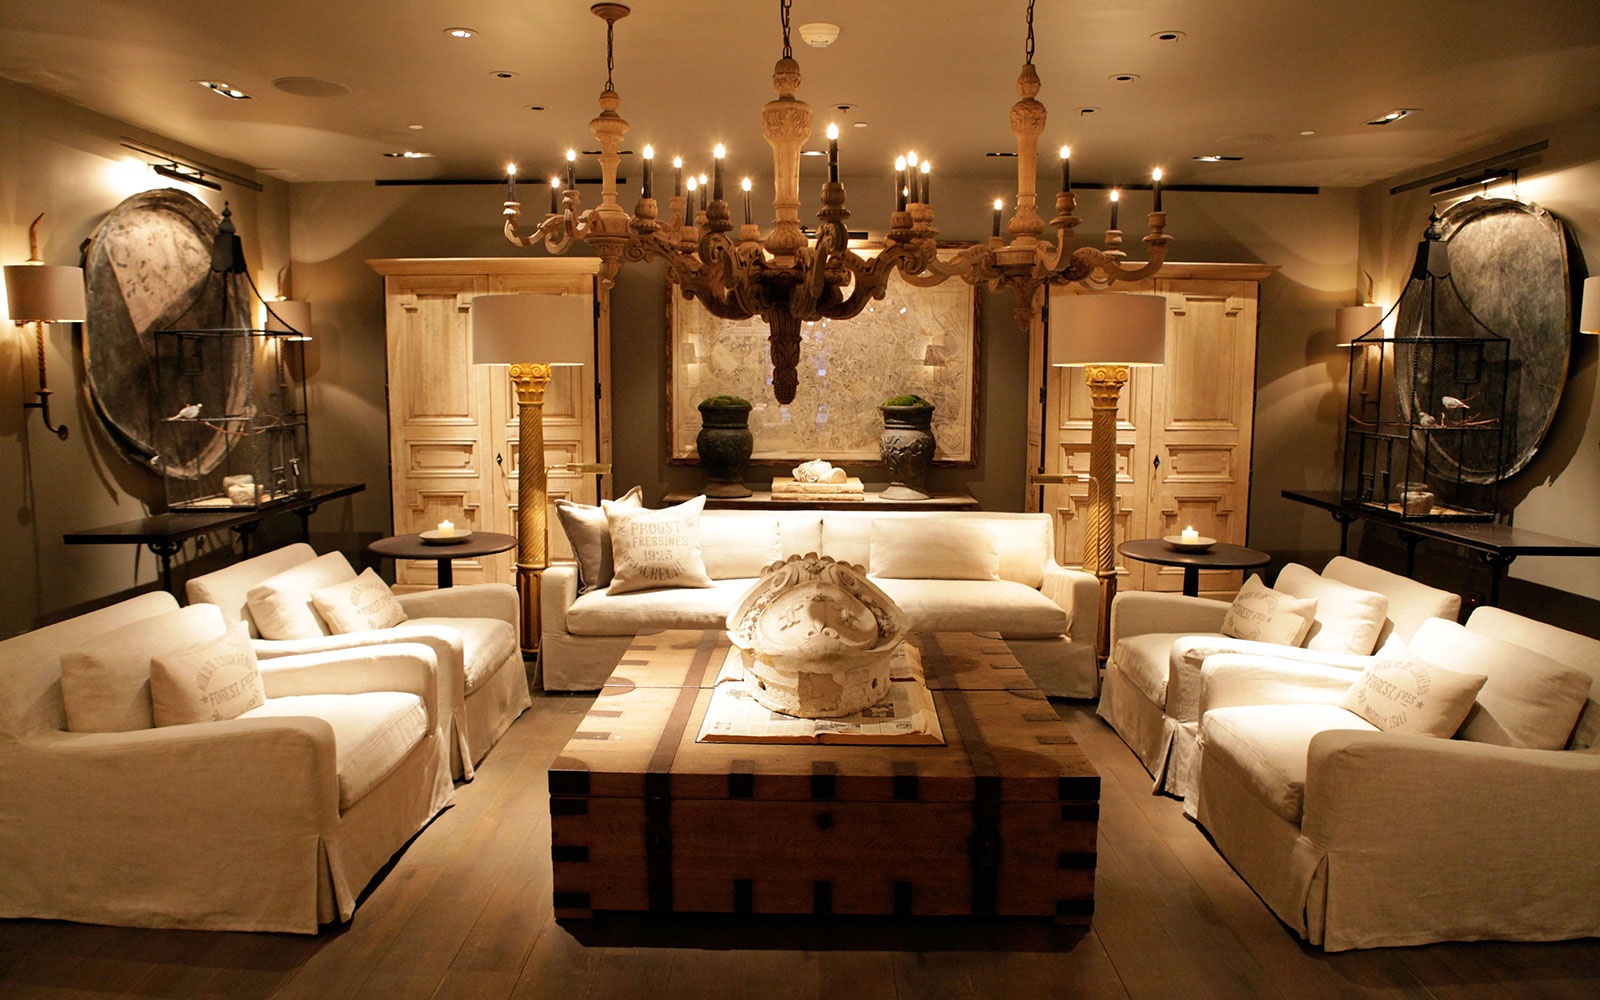 Restoration Hardware Will Open Its First-Ever Boutique Hotel in New York City